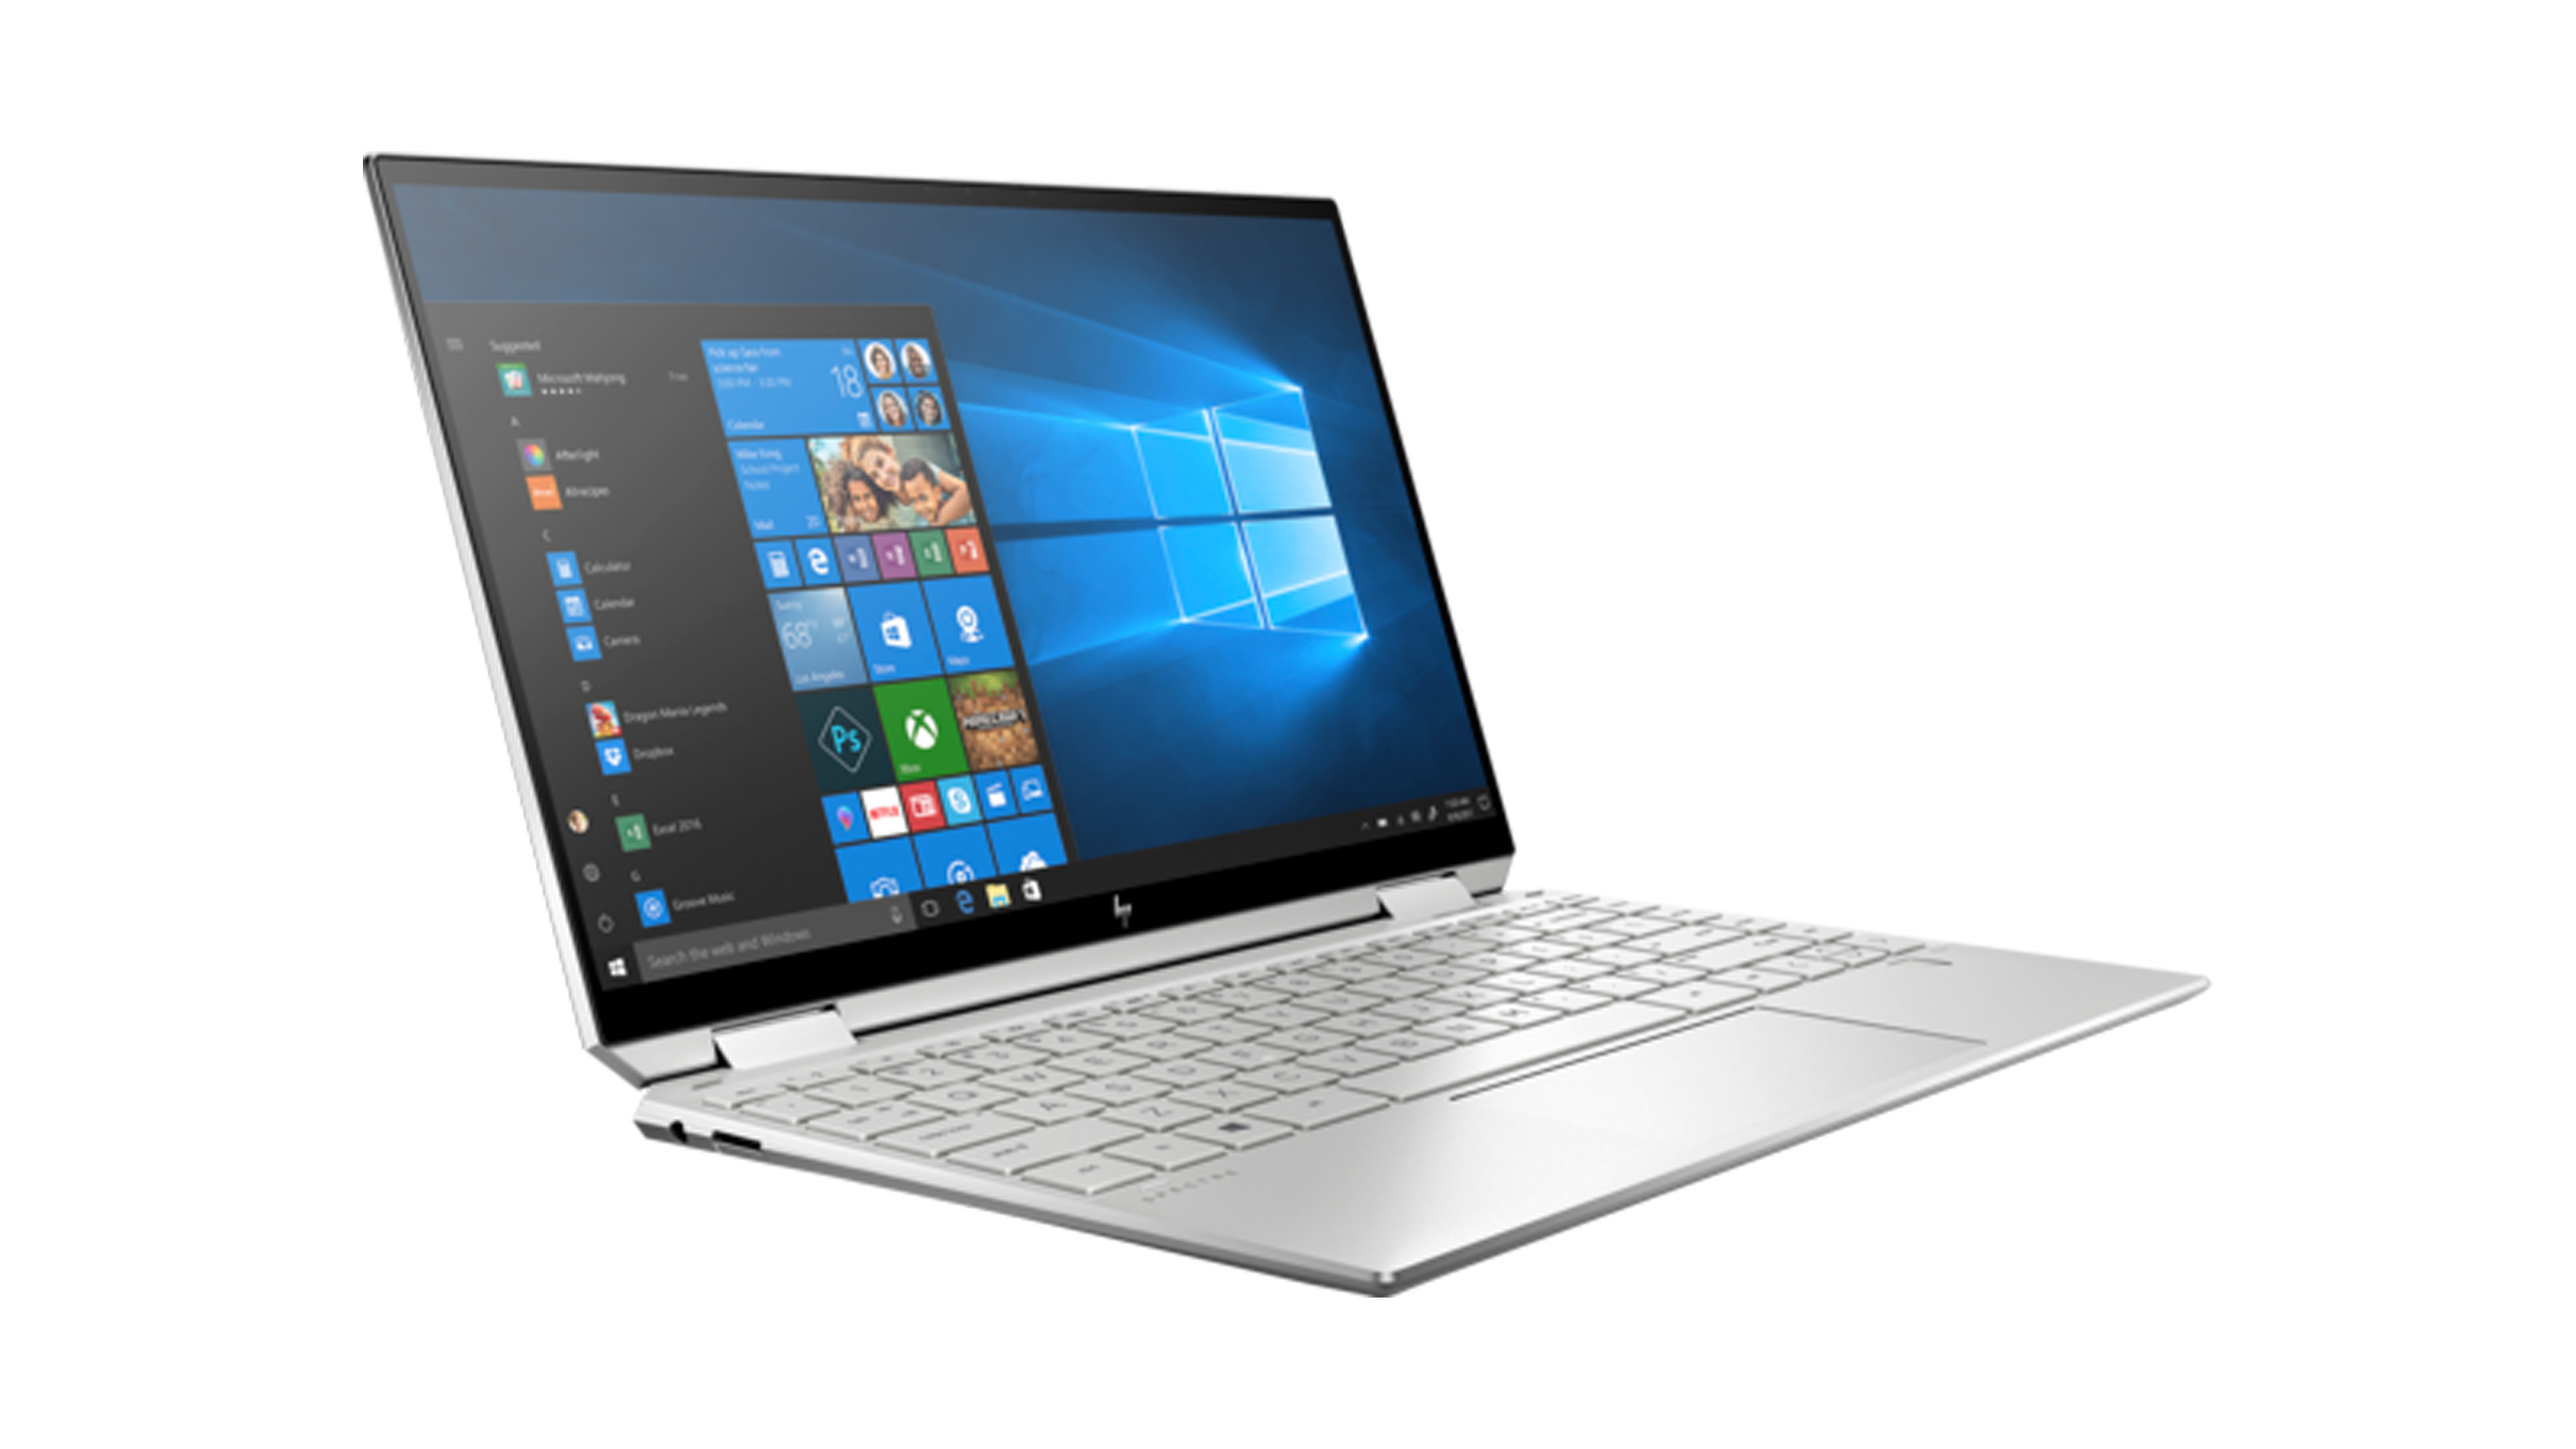 HP Spectre x360 (2021), one of the best laptops for engineering students, against a white background